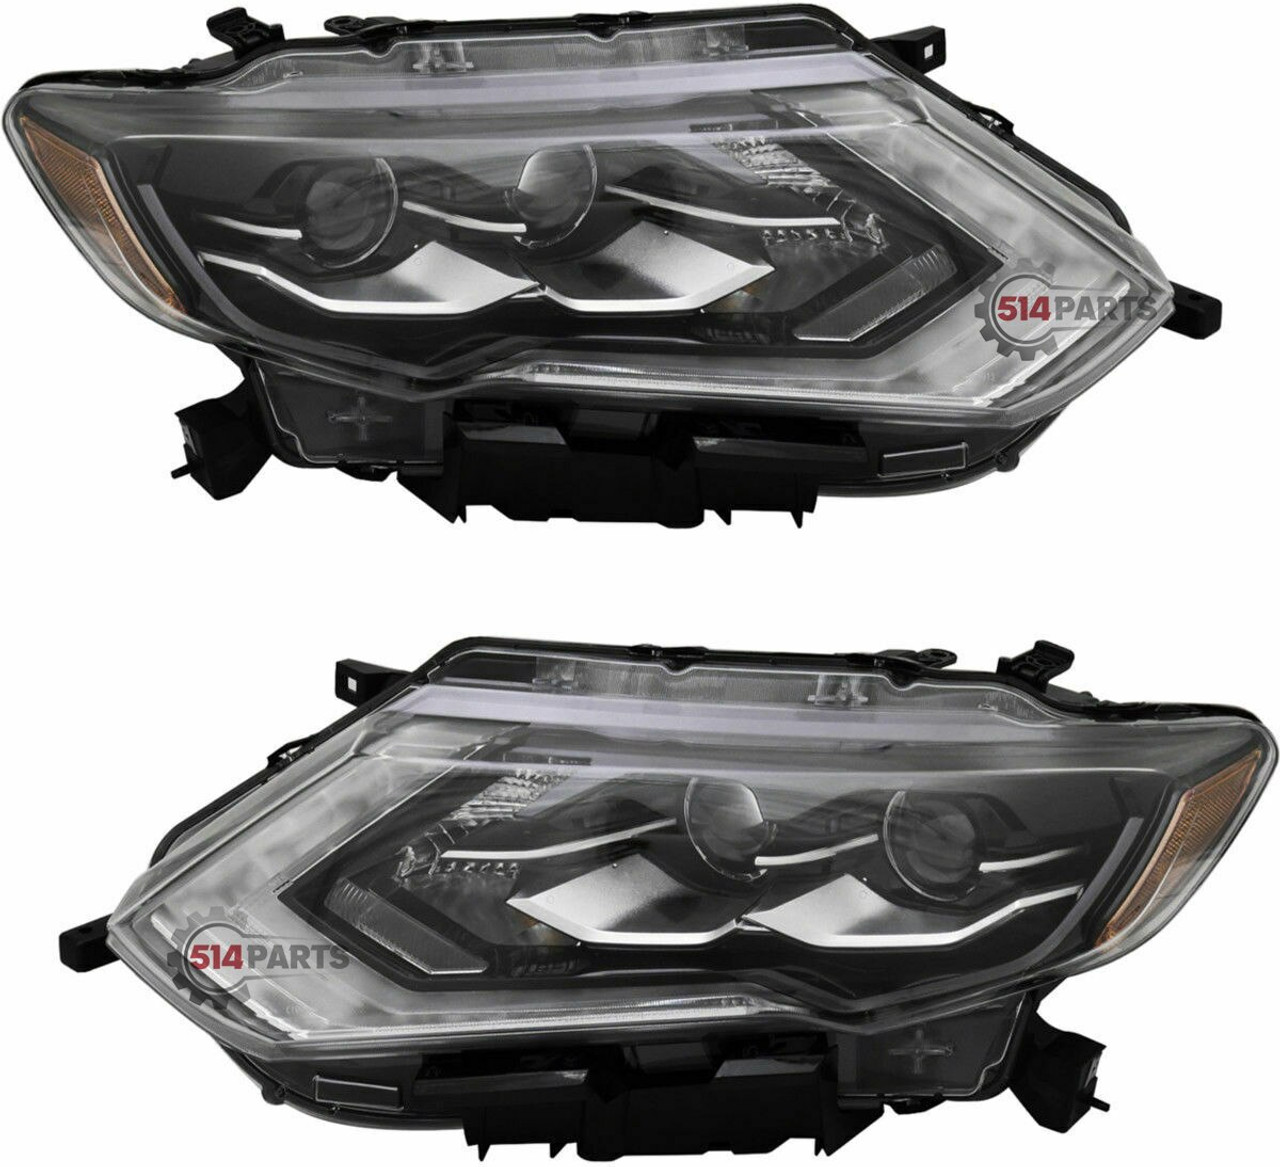 2017 - 2019 NISSAN ROGUE and ROGUE HYBRID LED HEADLIGHTS CAPA Certified - PHARES AVANT a DEL Certifiee CAPA